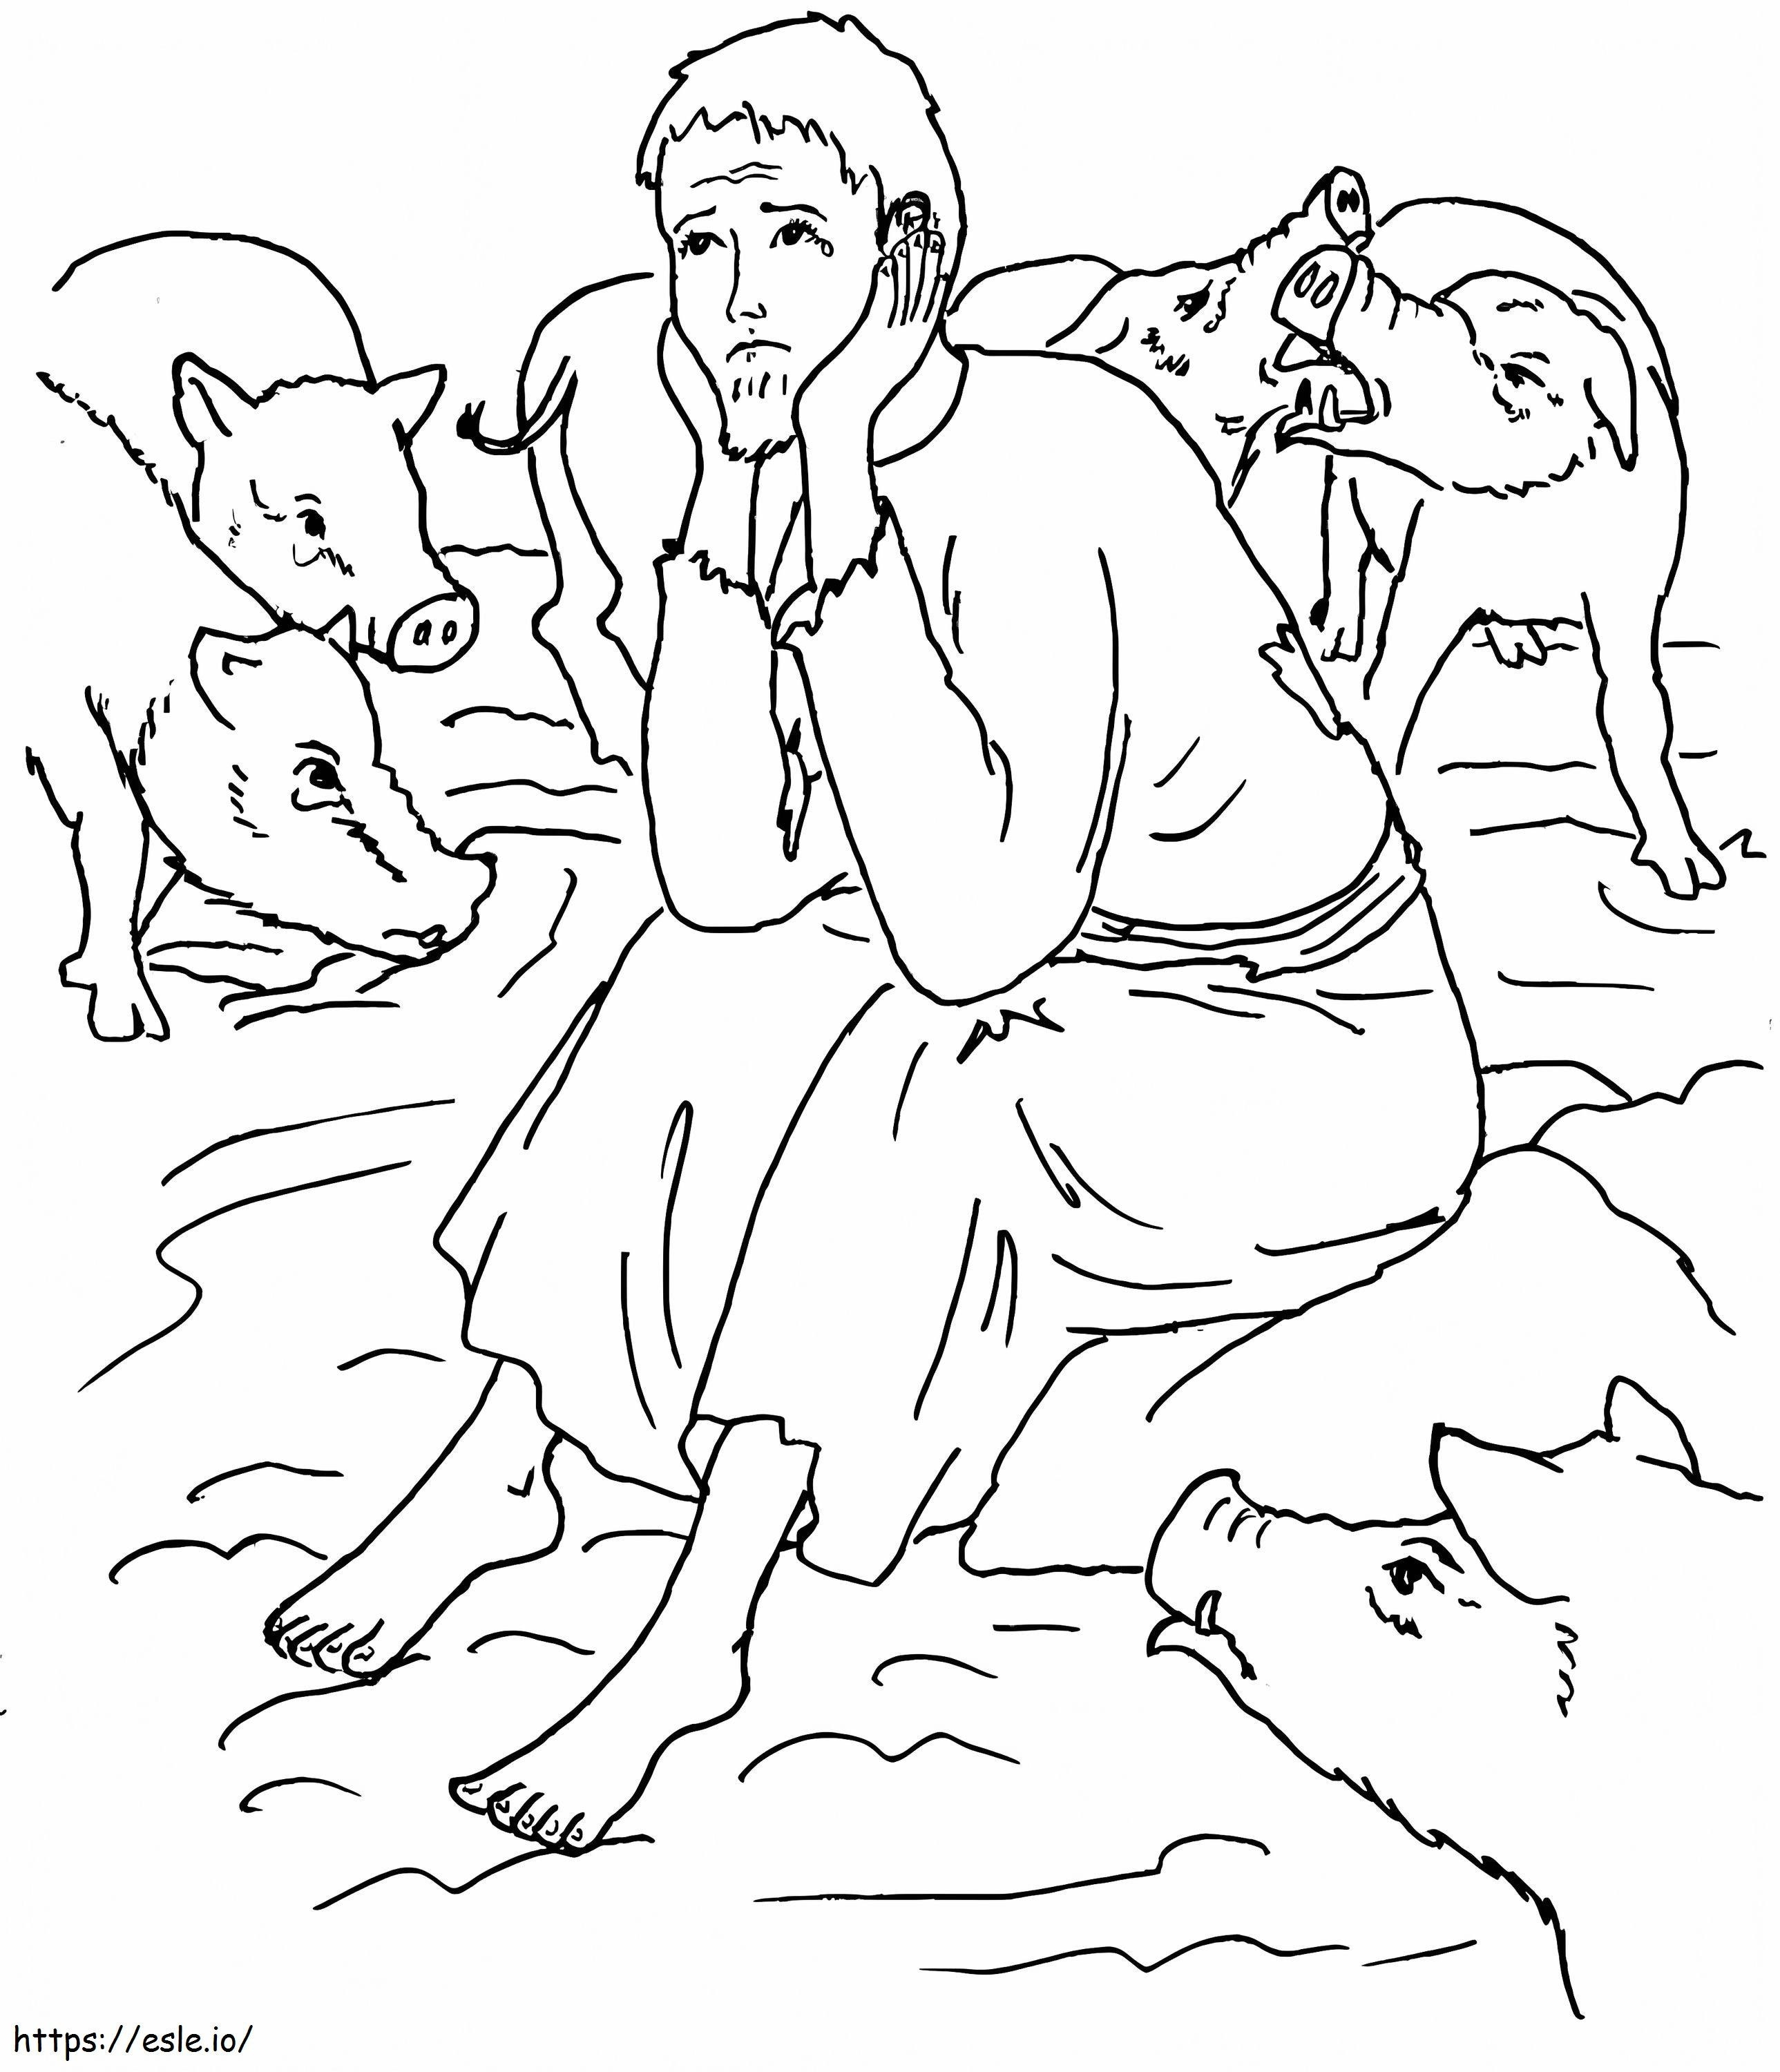 Prodigal Son 1 coloring page